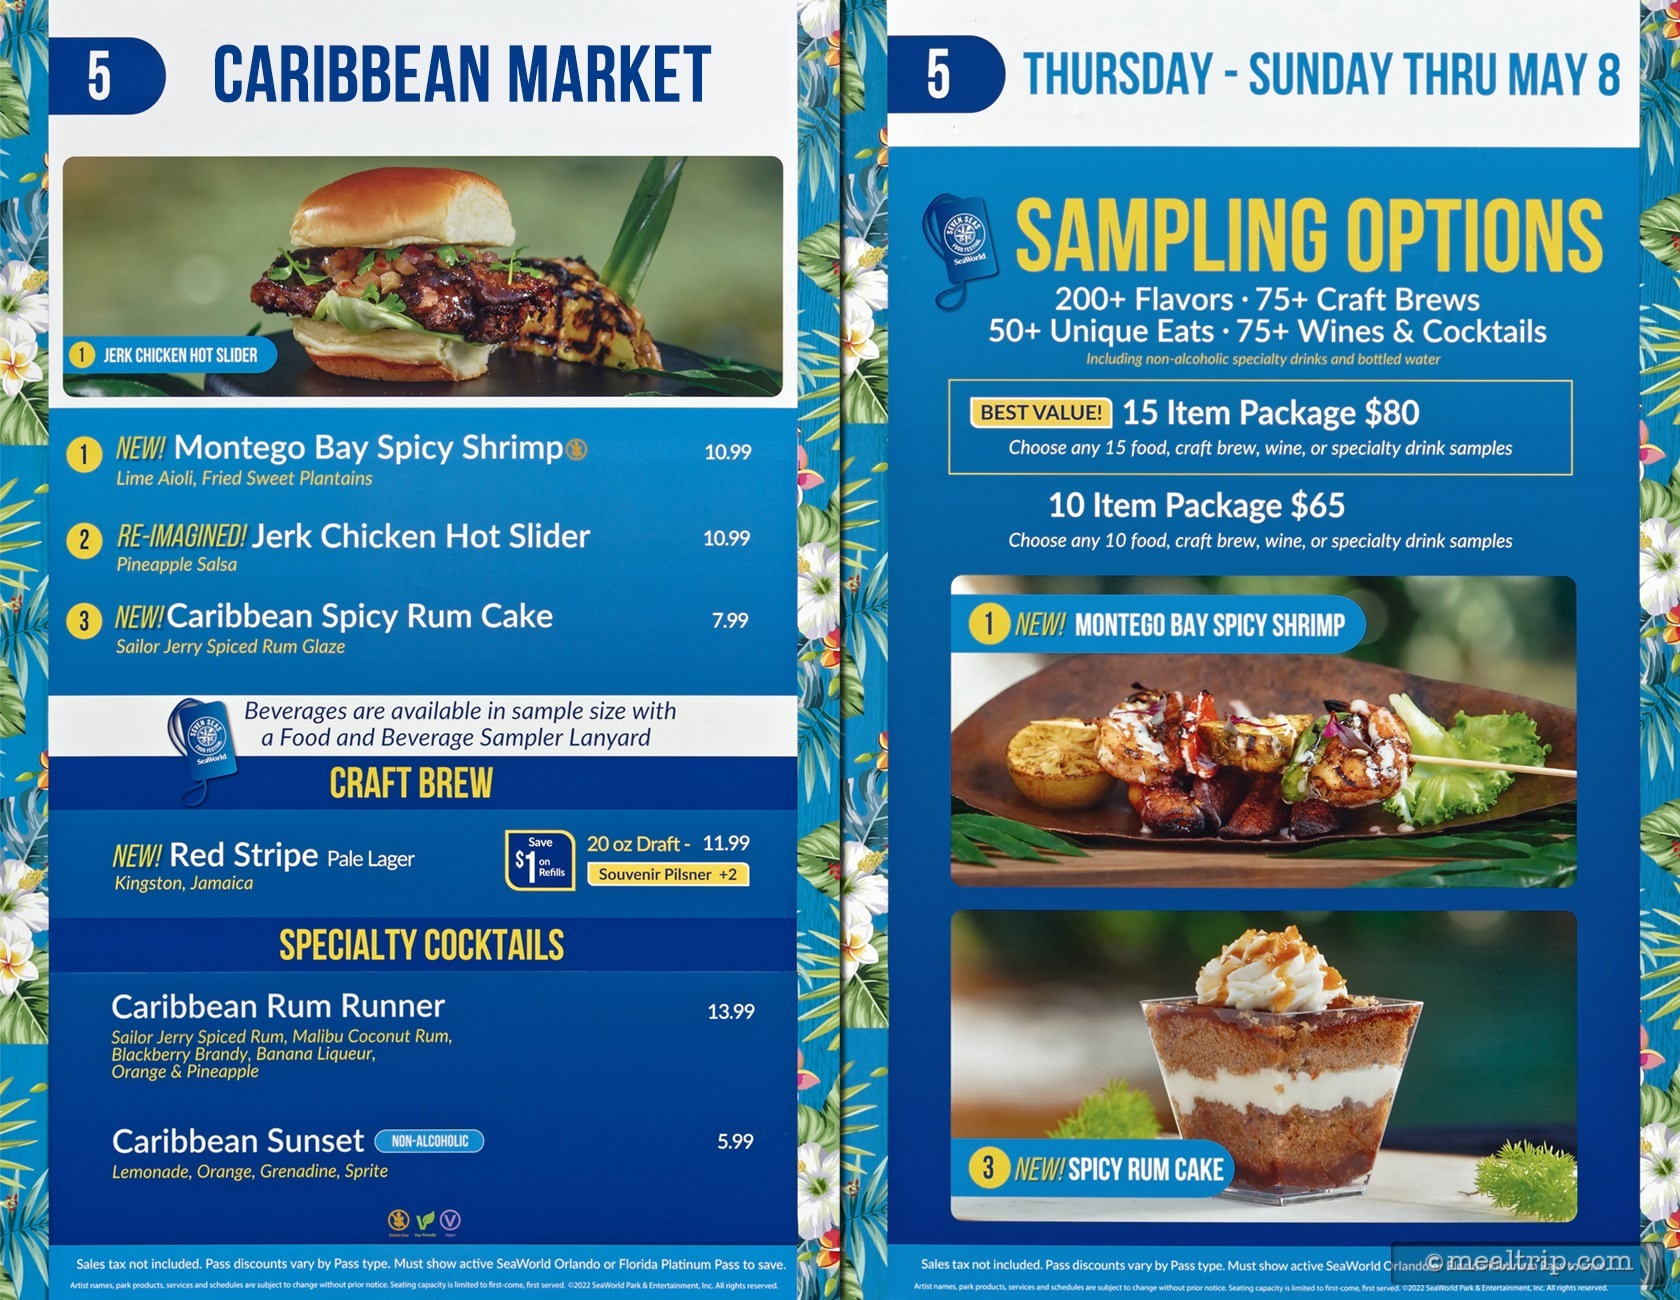 Caribbean Market Menu Board with Prices